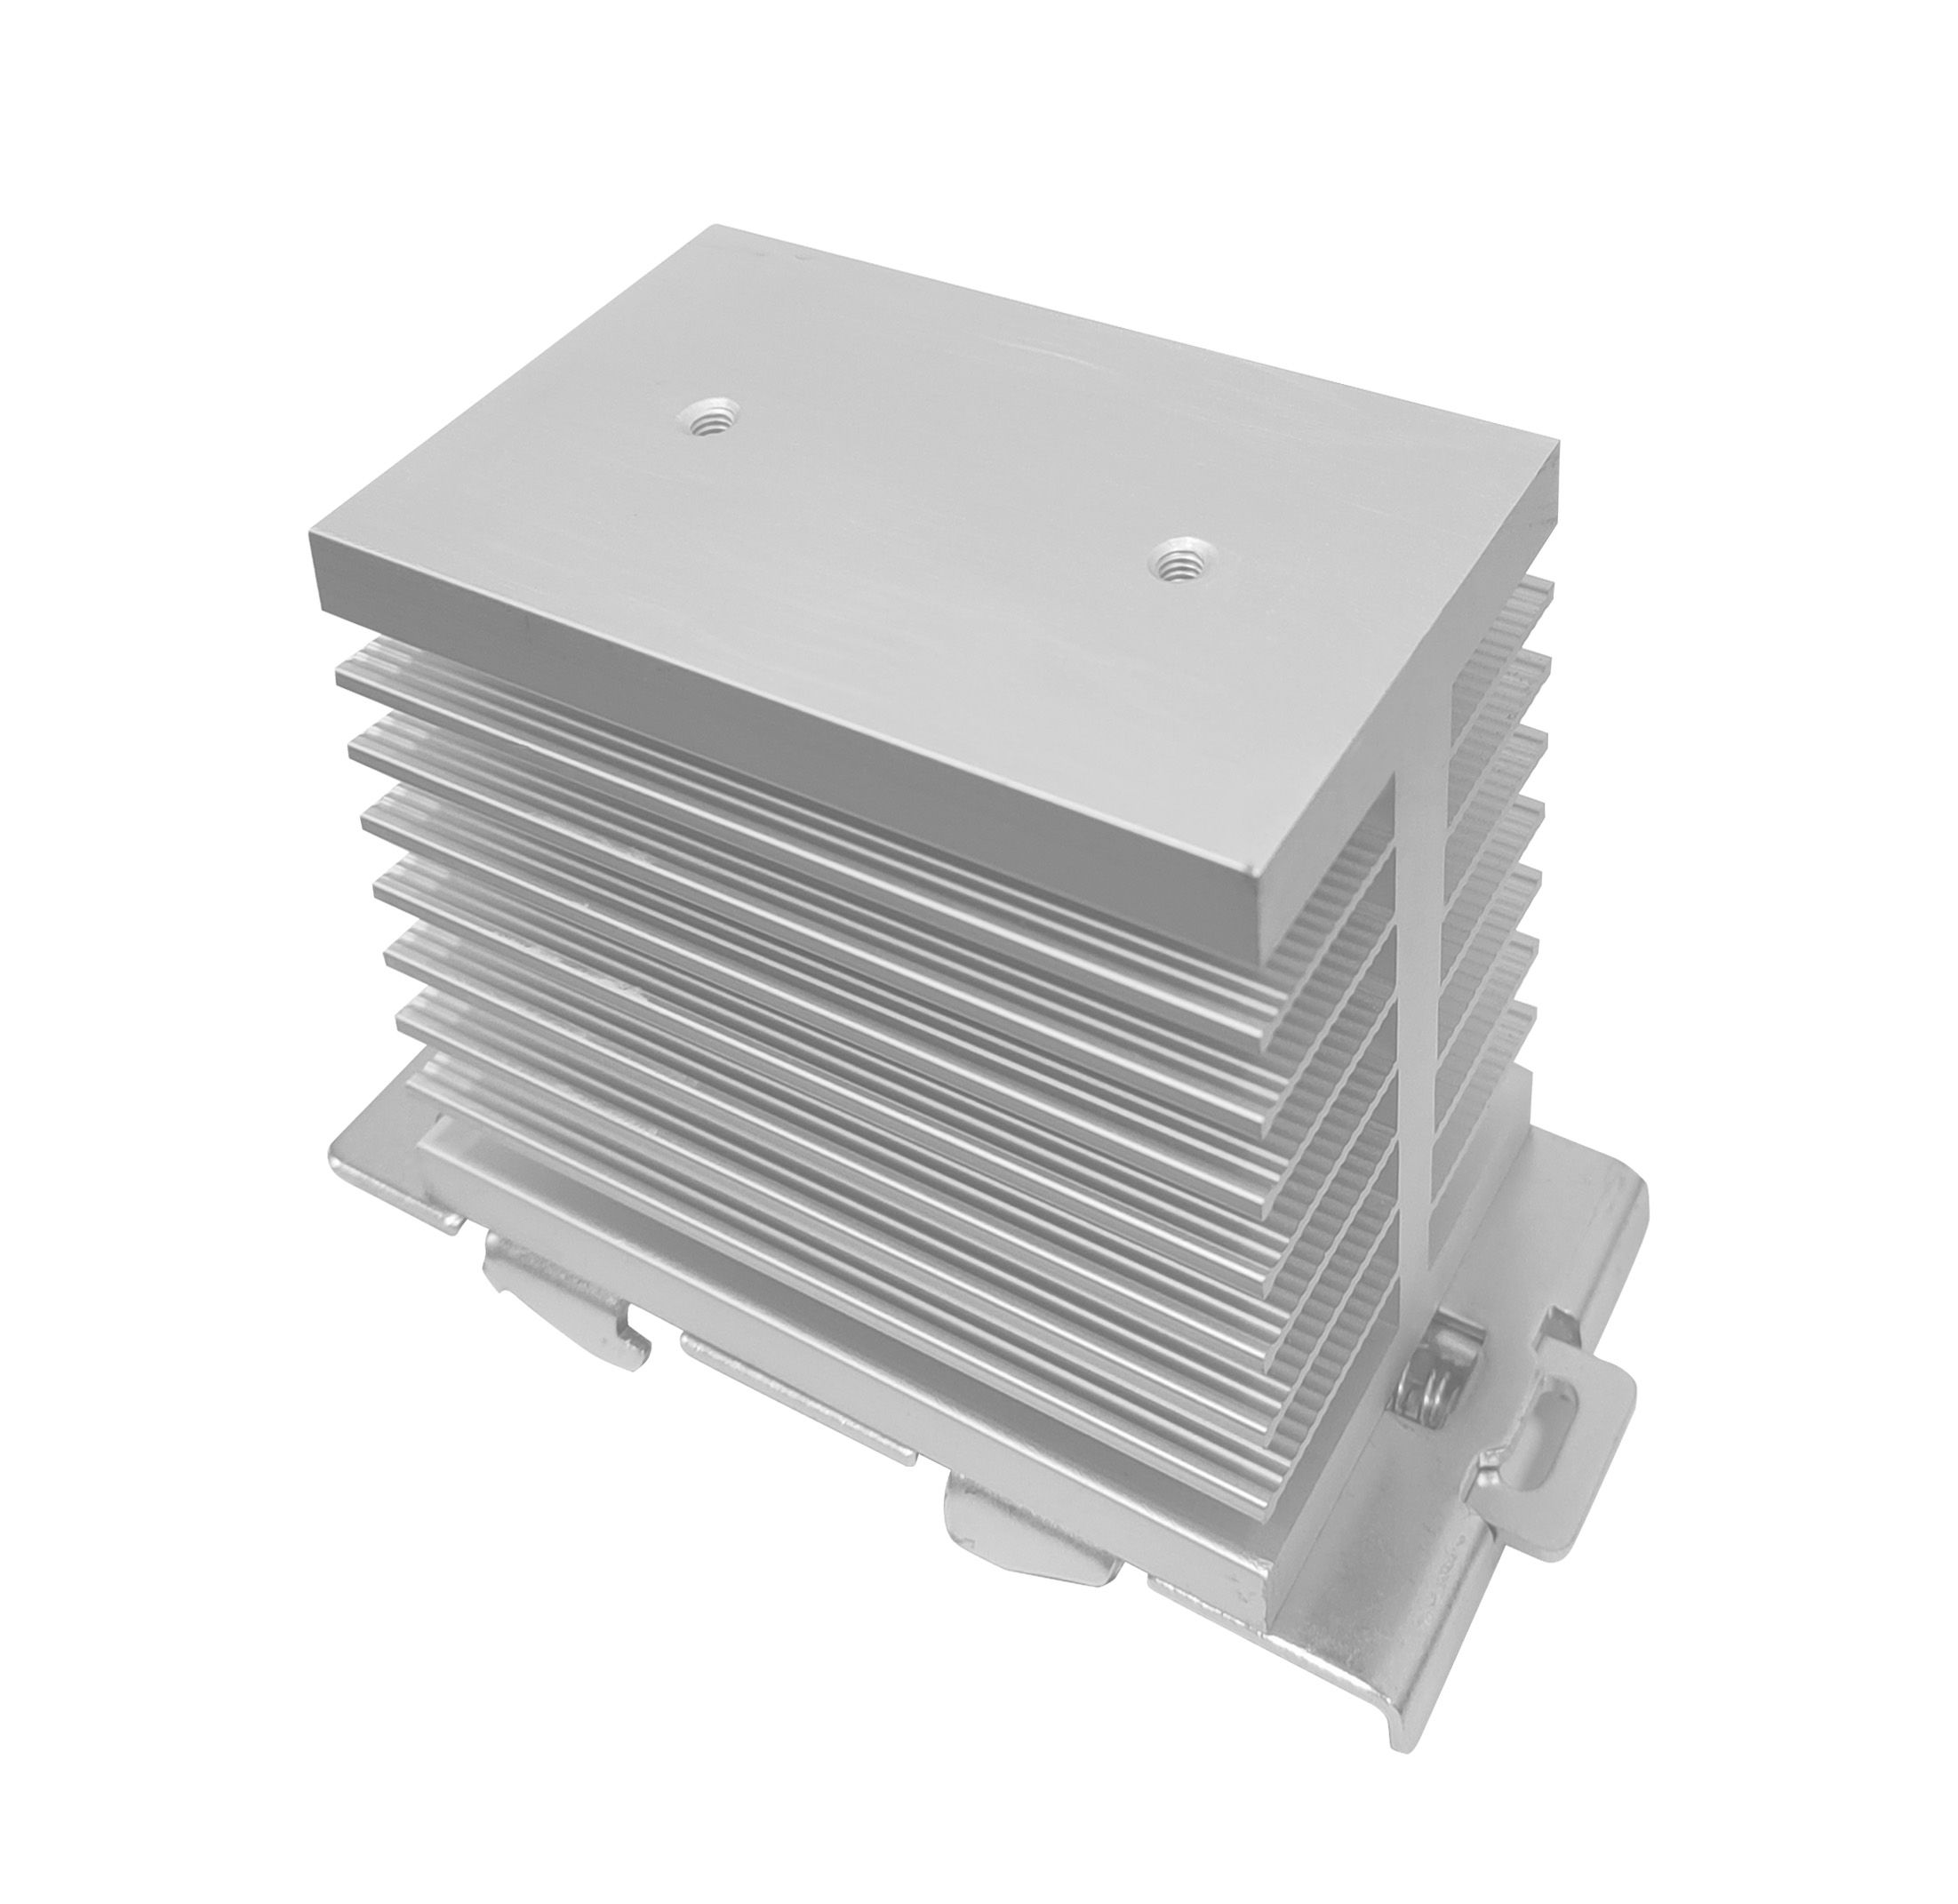 DIN Rail Relay Heatsink for use with Single Phase SSR